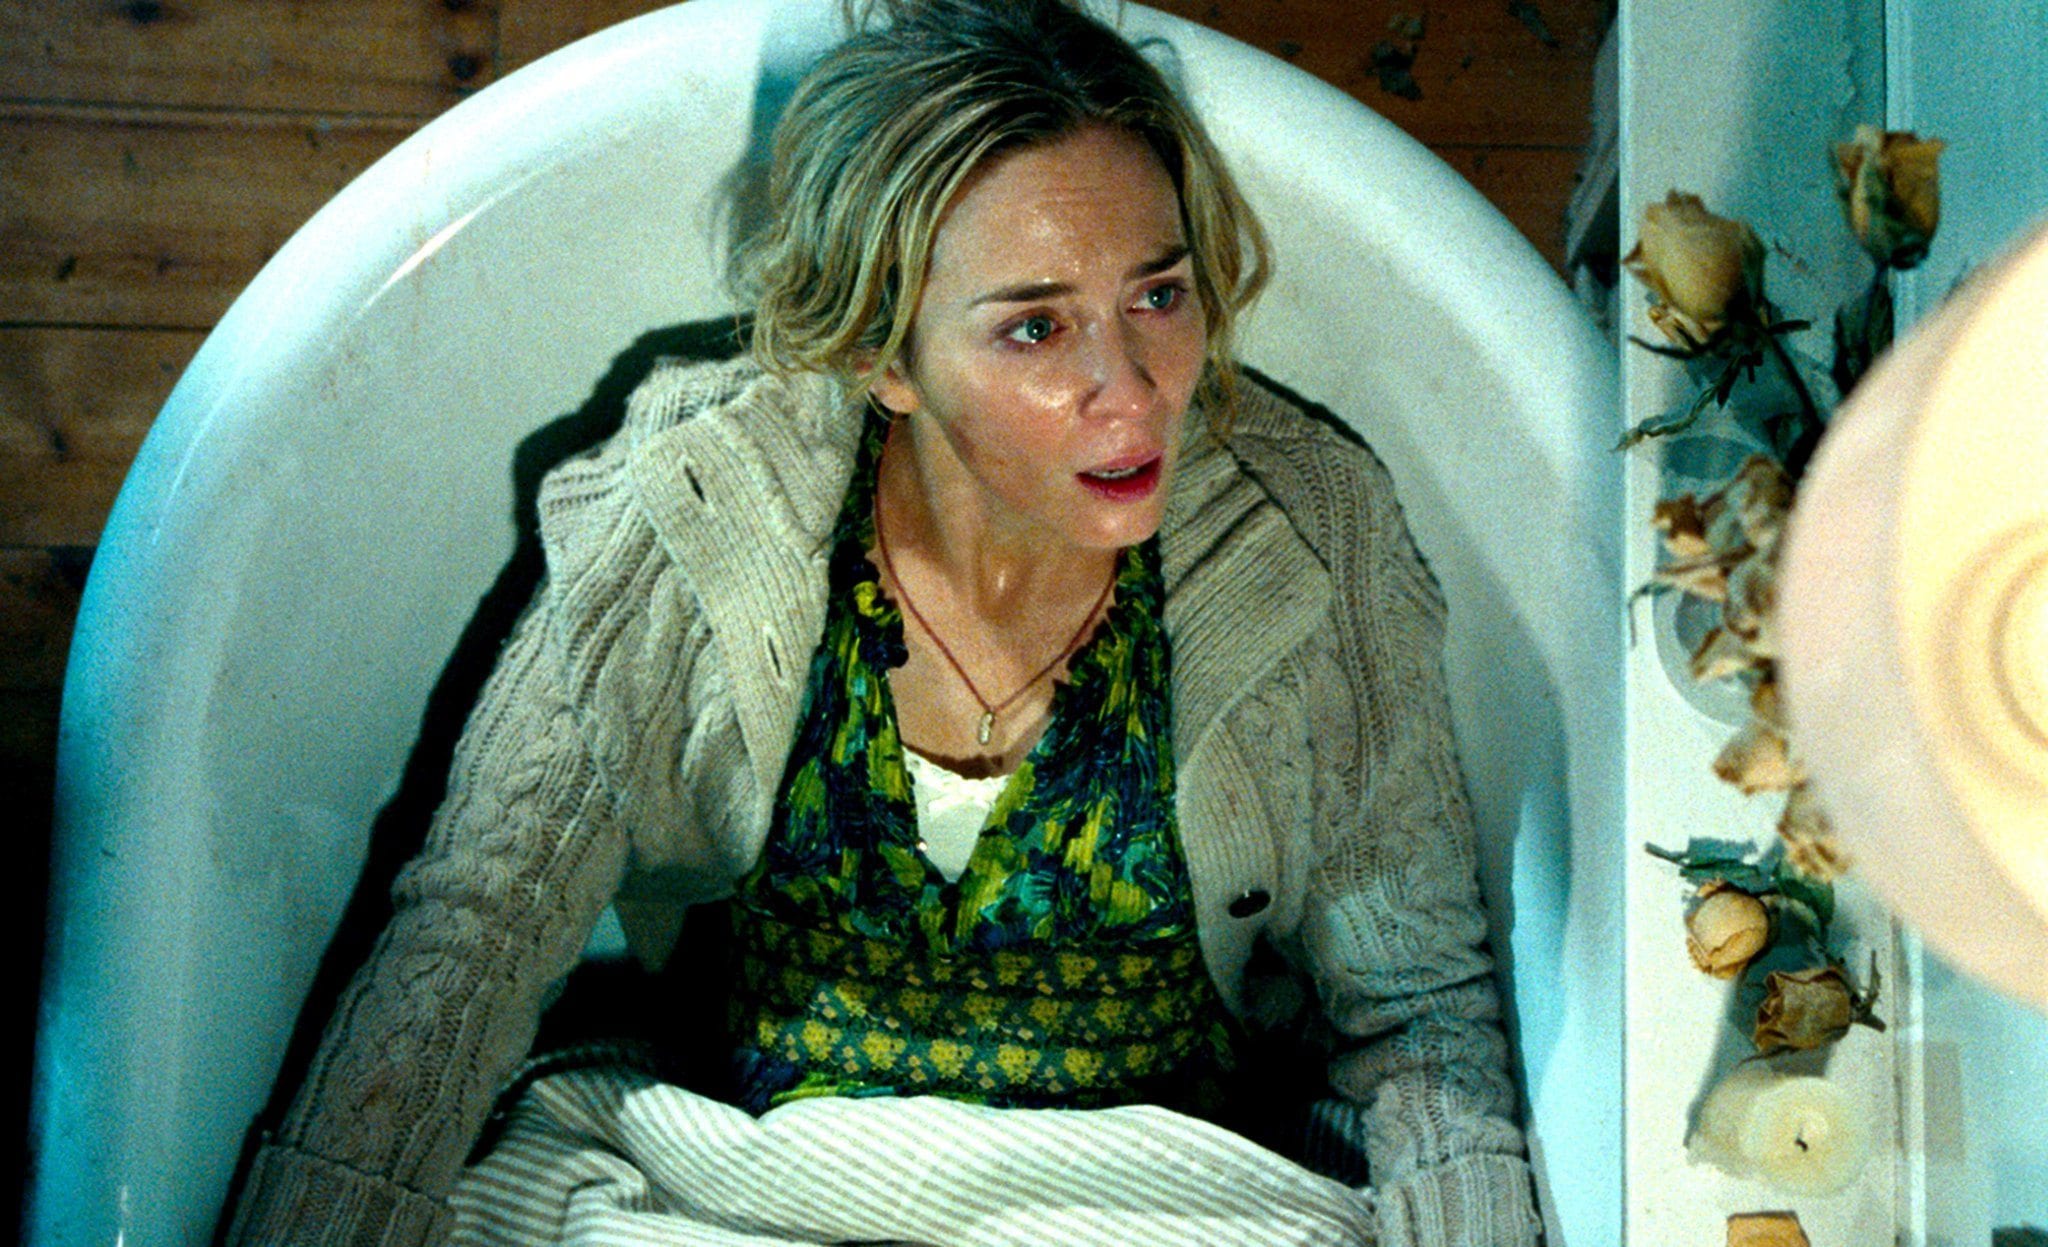 Although the writers drew inspiration from theatrical icons while adding their own modern twists, there is one major problem that overshadows the movie like a multi-faced, hypersensitive monster hovers over its prey – 'A Quiet Place' just isn’t very good.